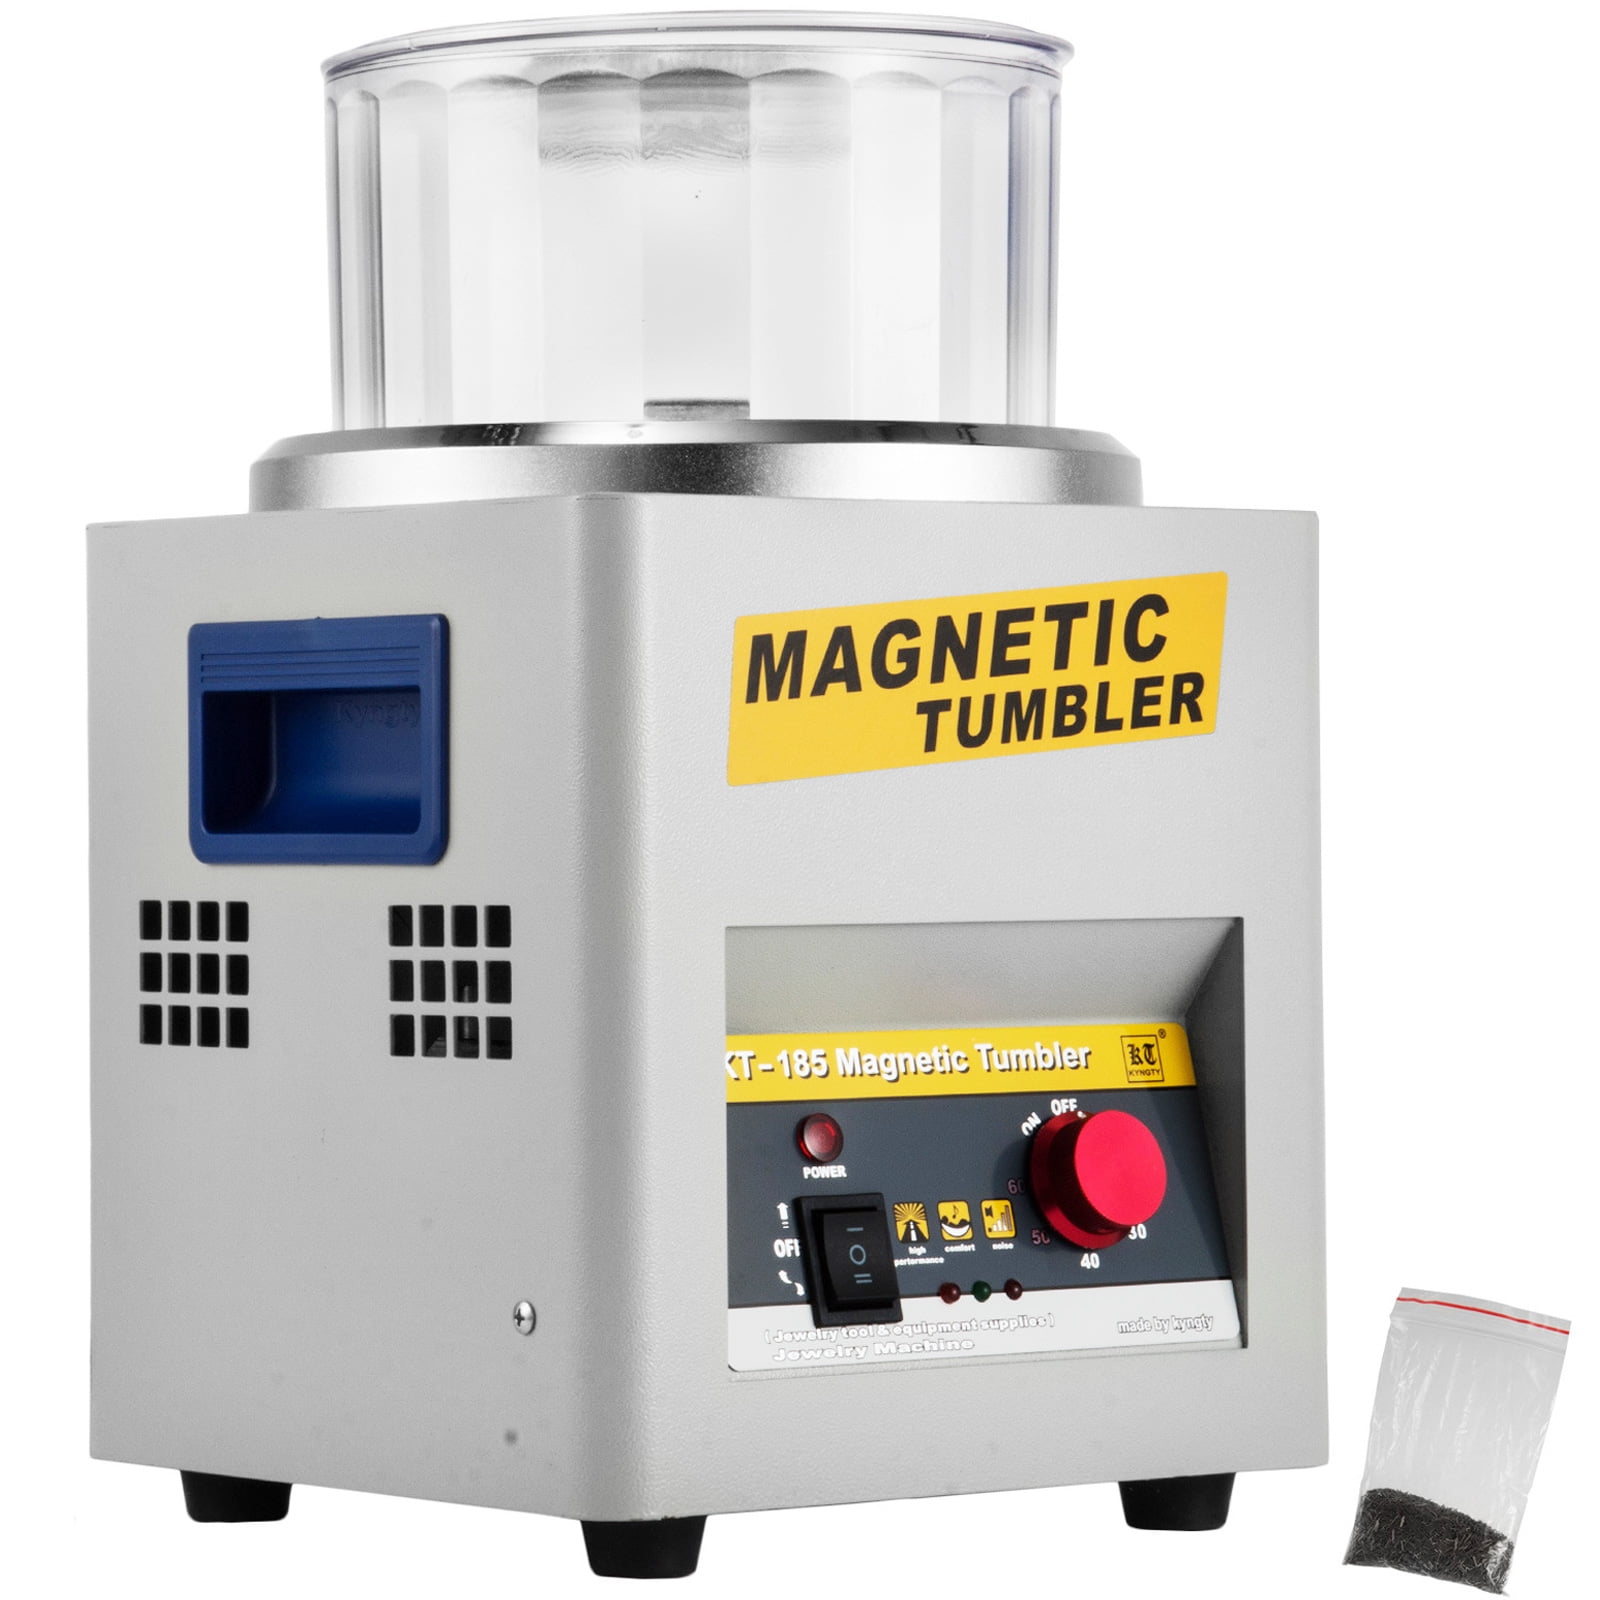 Benchmark, Efficient magnetic tumbler jewelry polisher for